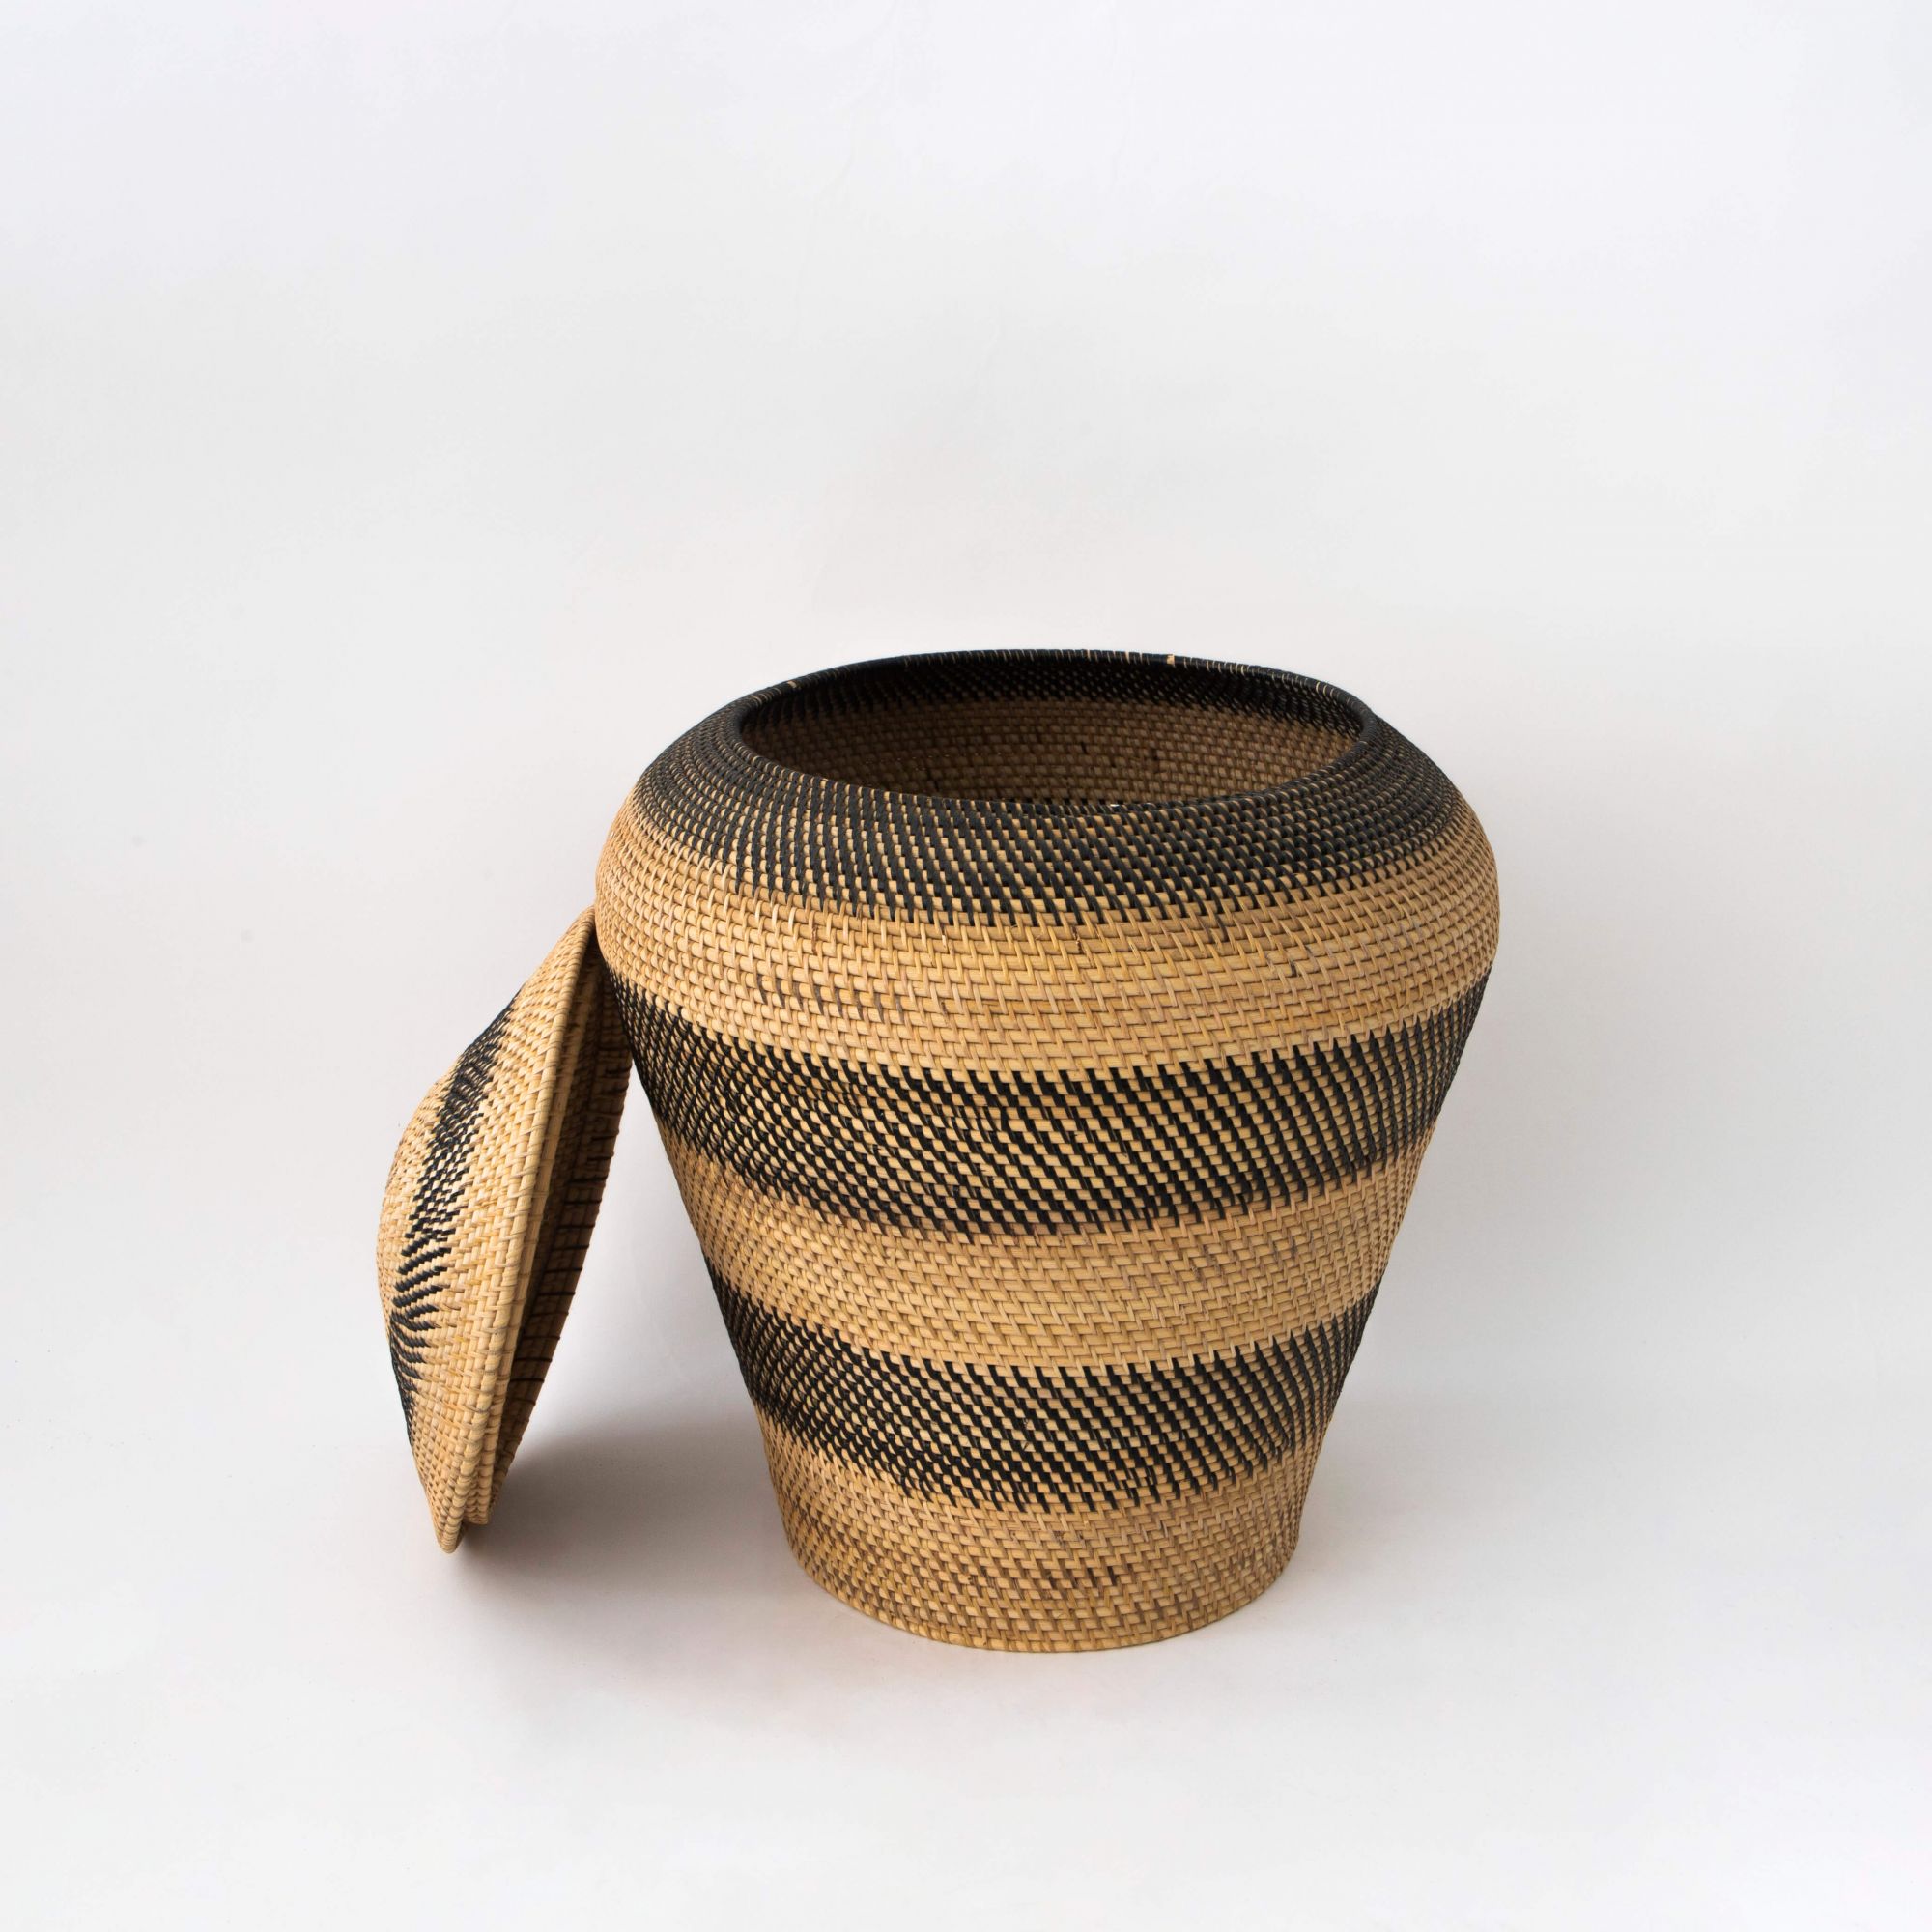 Malay Zebra Pot in Natural & Charcoal